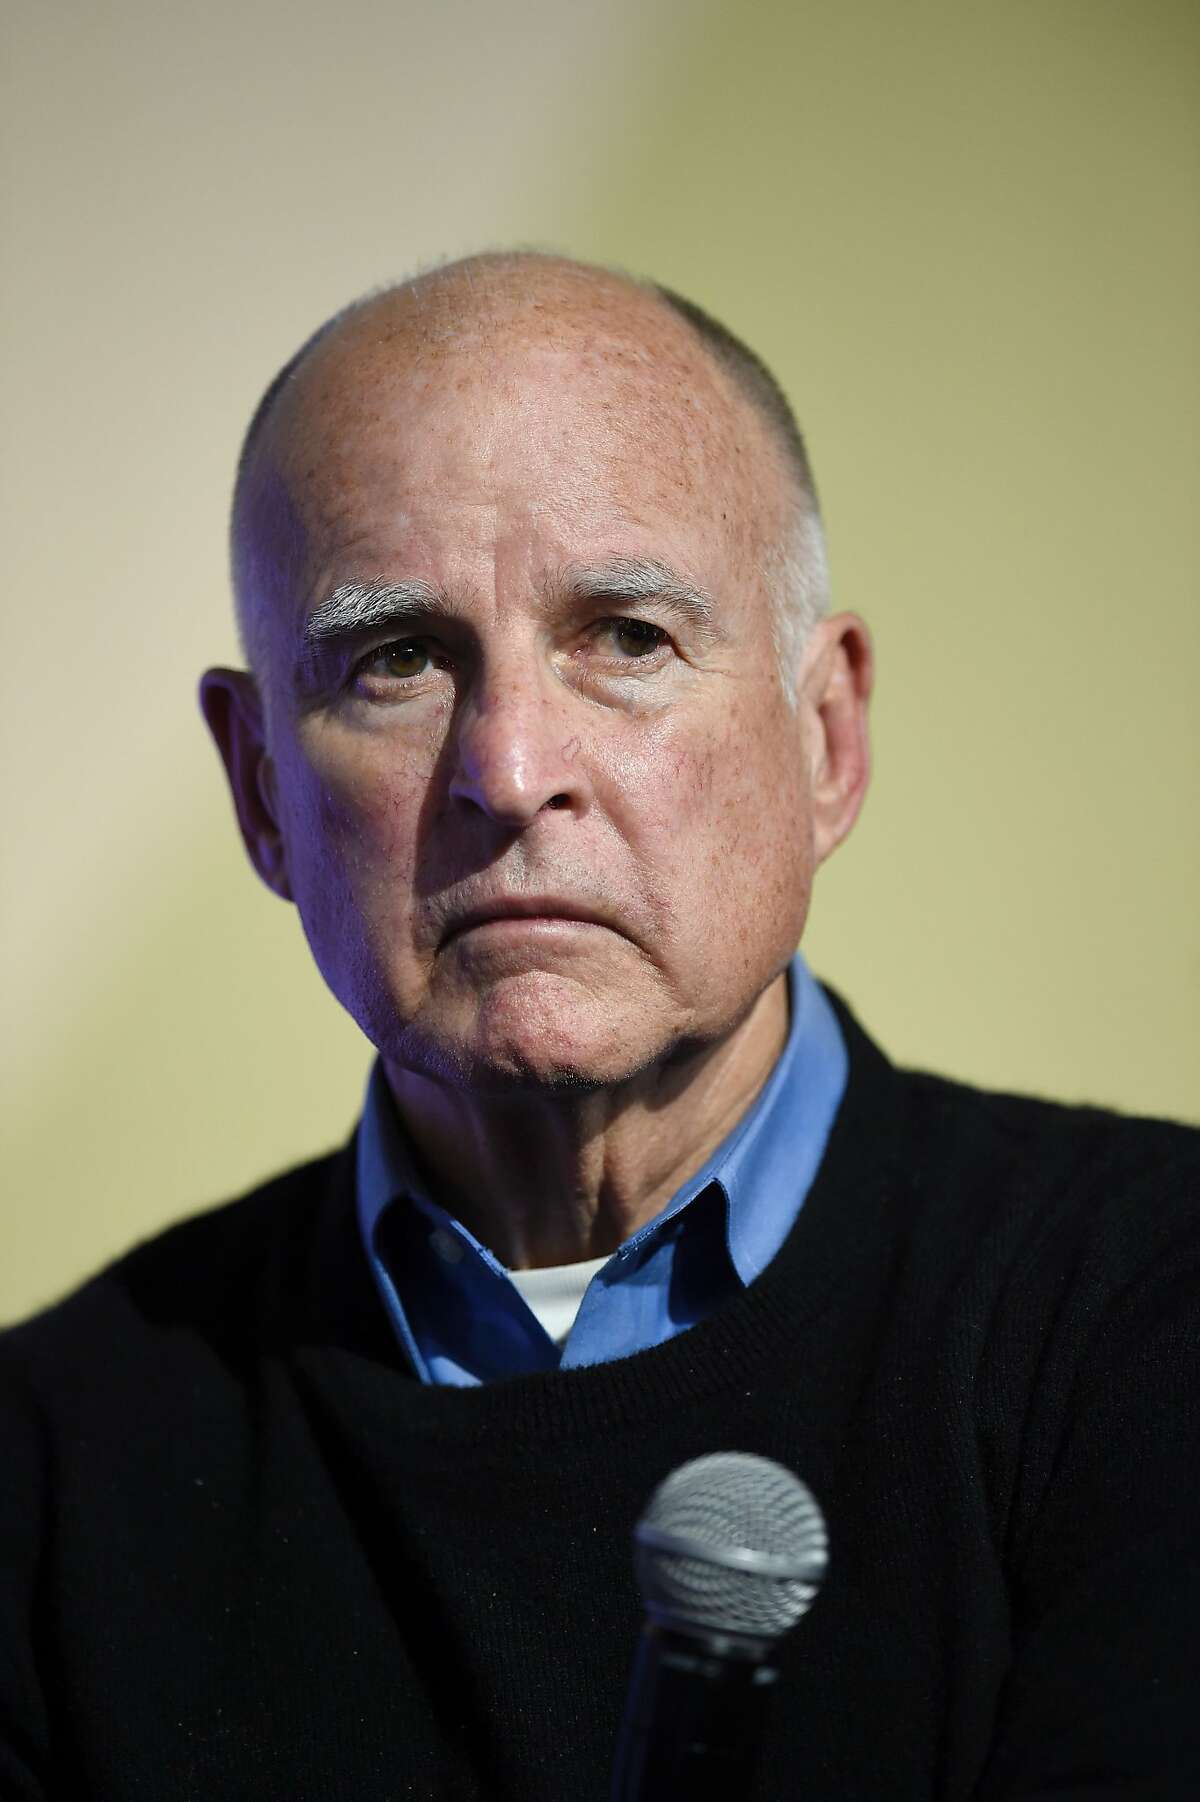 (FILES) This file photo taken on December 05, 2015 shows Governor of California Jerry Brown the COP21 United Nations conference on climate change in Le Bourget, France. California's governor approved a series of gun control measures on July 1, 2016, including new restrictions on assault weapons, in the wake of recent mass shootings across the country that have triggered outrage. Governor Jerry Brown signed into law six bills that were part of a package put before him by state lawmakers, further boosting firearms restrictions in one of the US states with the most stringent gun control laws. / AFP PHOTO / ERIC FEFERBERGERIC FEFERBERG/AFP/Getty Images